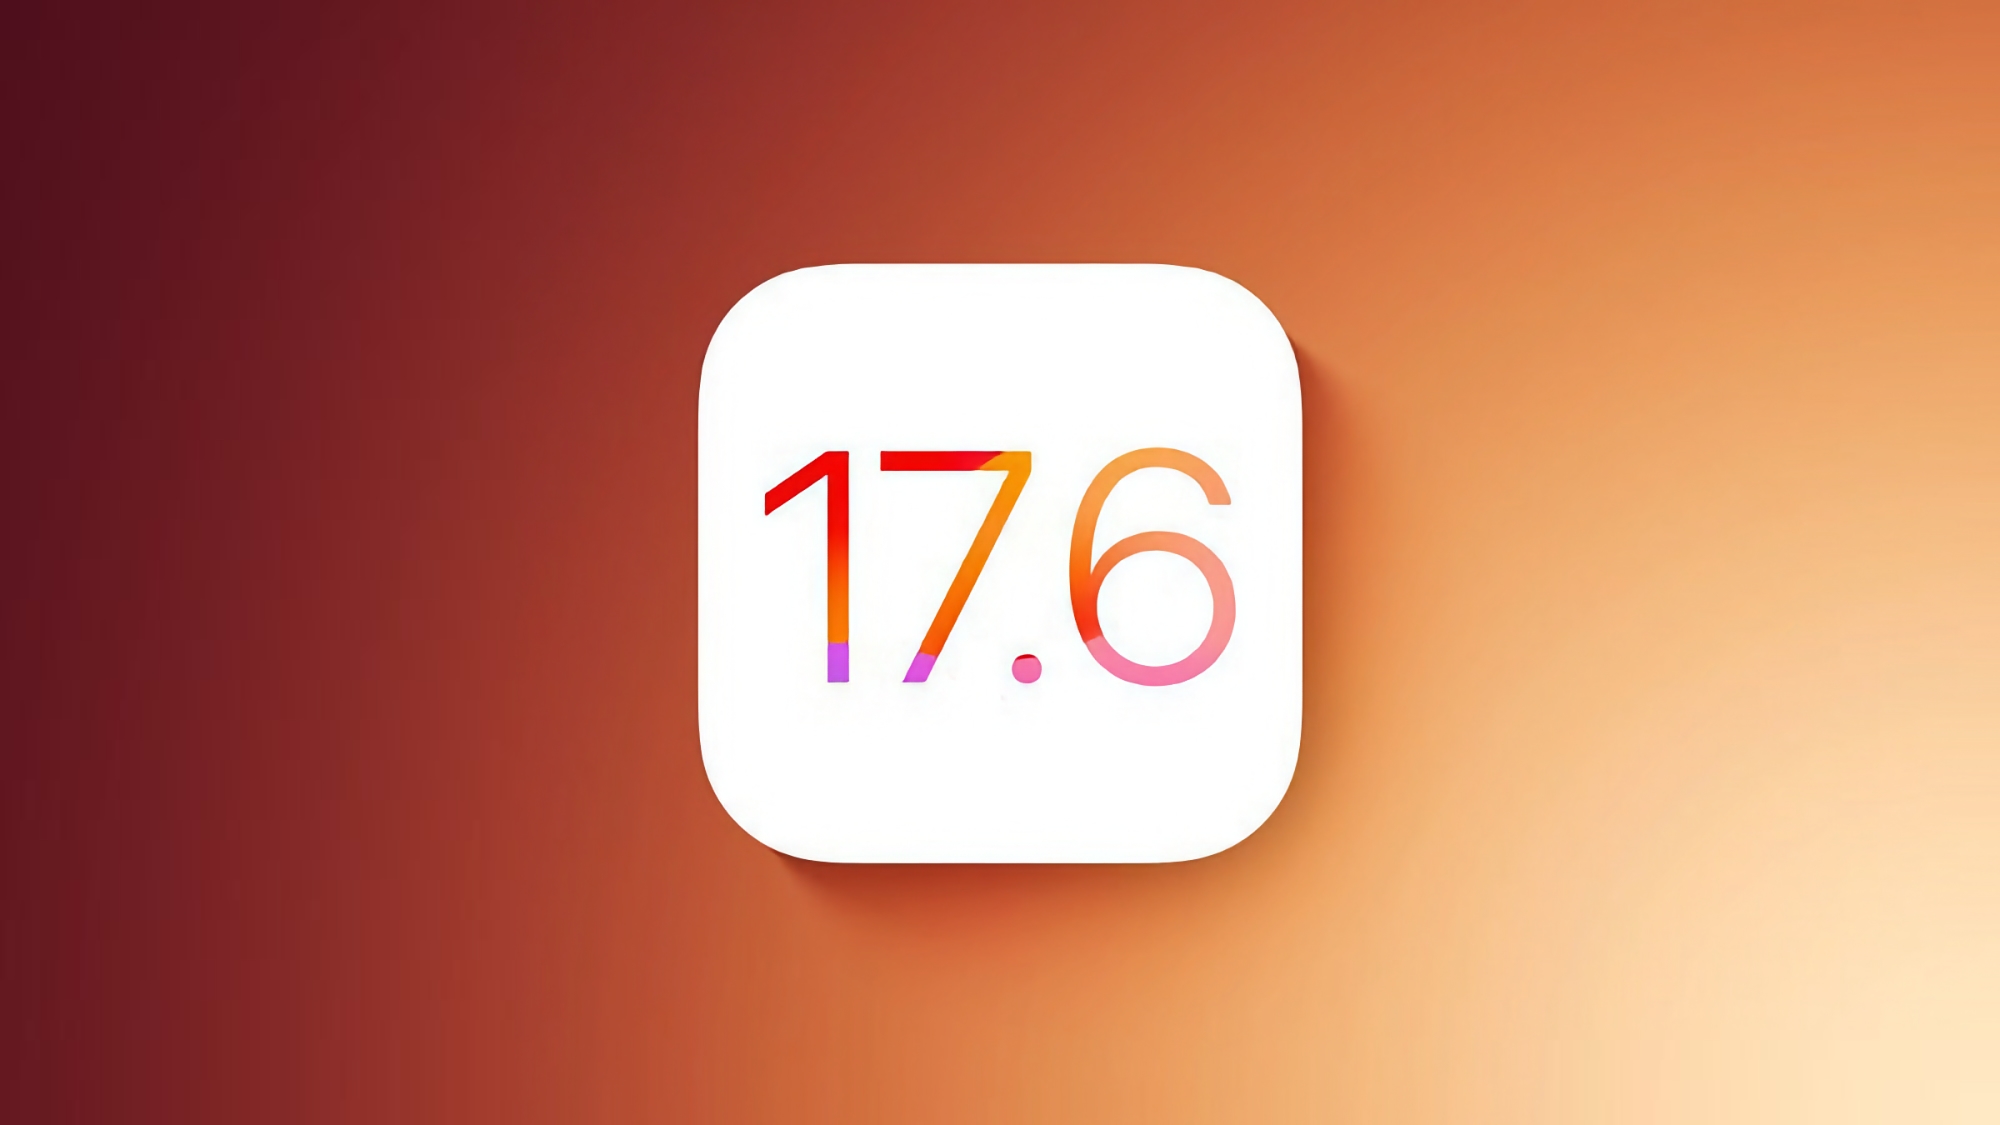 Apple has released a stable version of iOS 17.6 with bug fixes and improved security